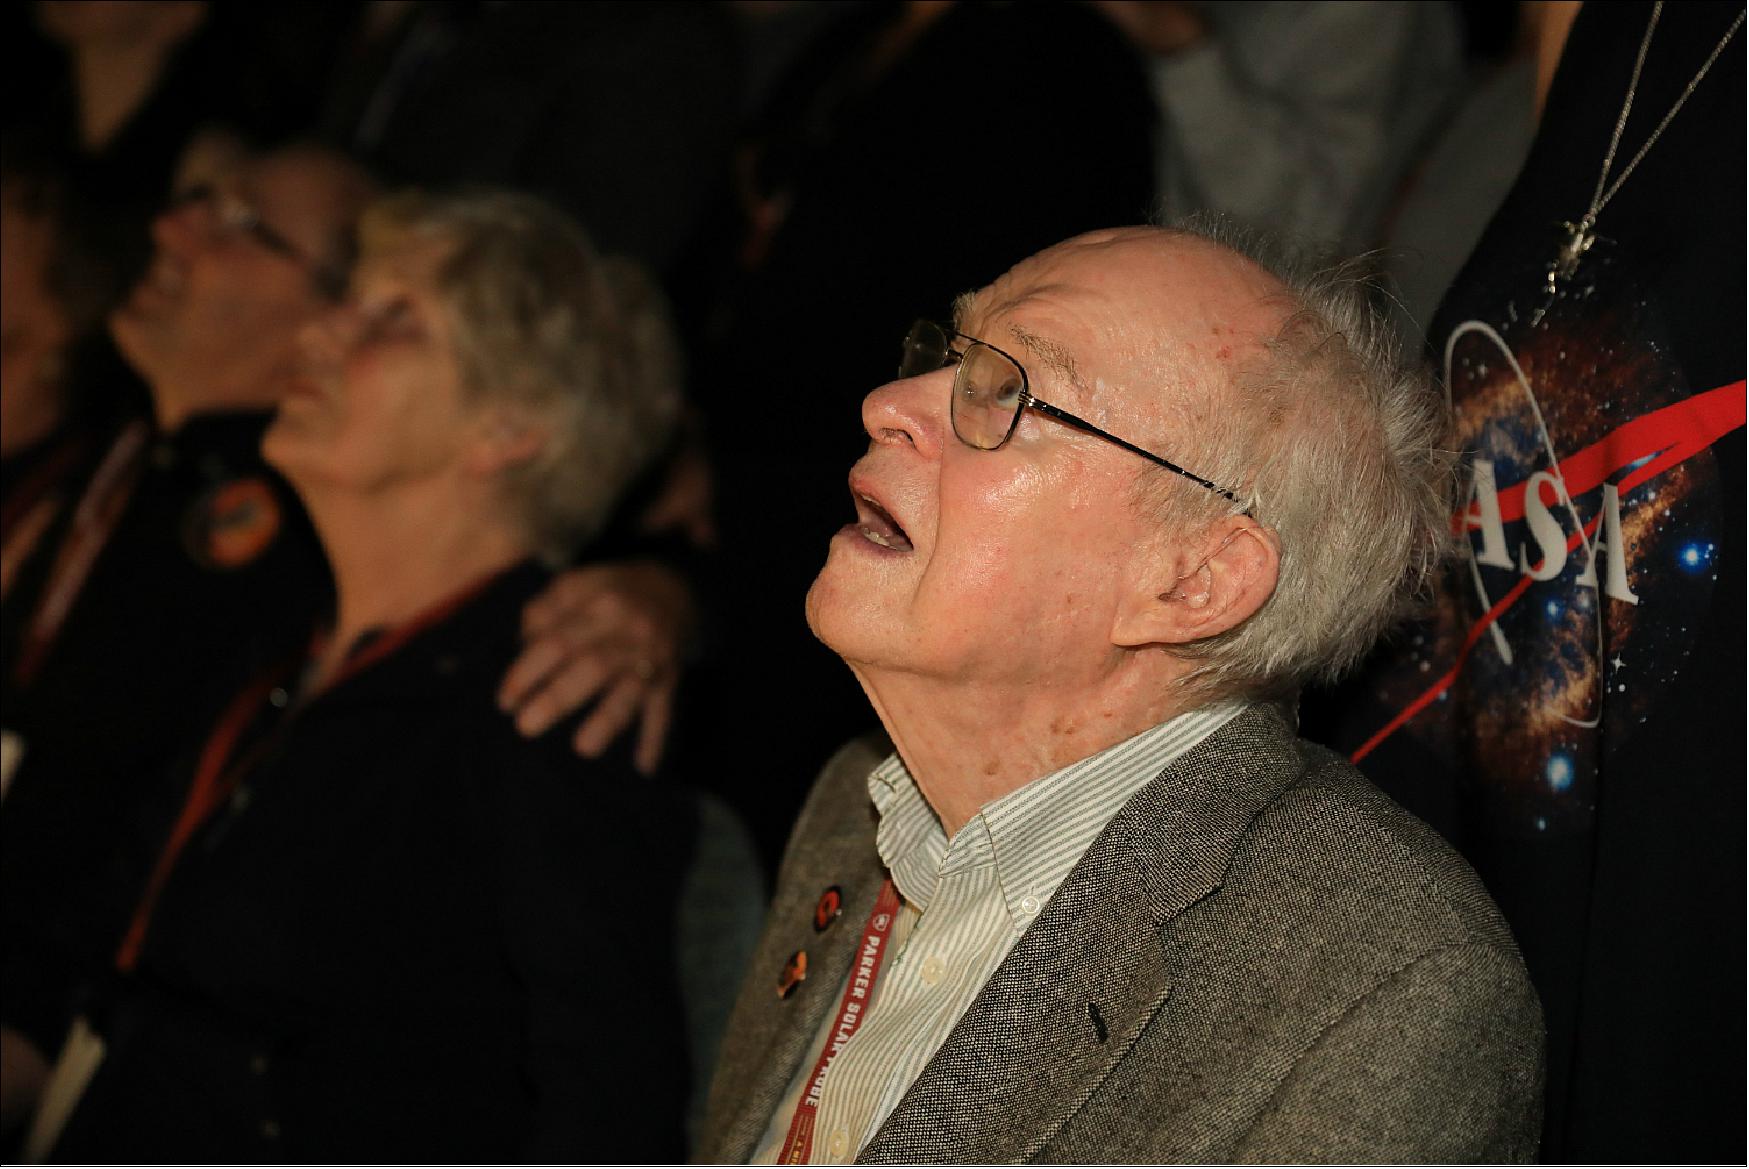 Figure 17: Renowned physicist Eugene Parker (at 91) watches the launch of the spacecraft that bears his name – NASA's Parker Solar Probe – early in the morning on 12 August, 2018, from Launch Complex 37 at Cape Canaveral Air Force Station in Florida (image credit: NASA, Glenn Benson)